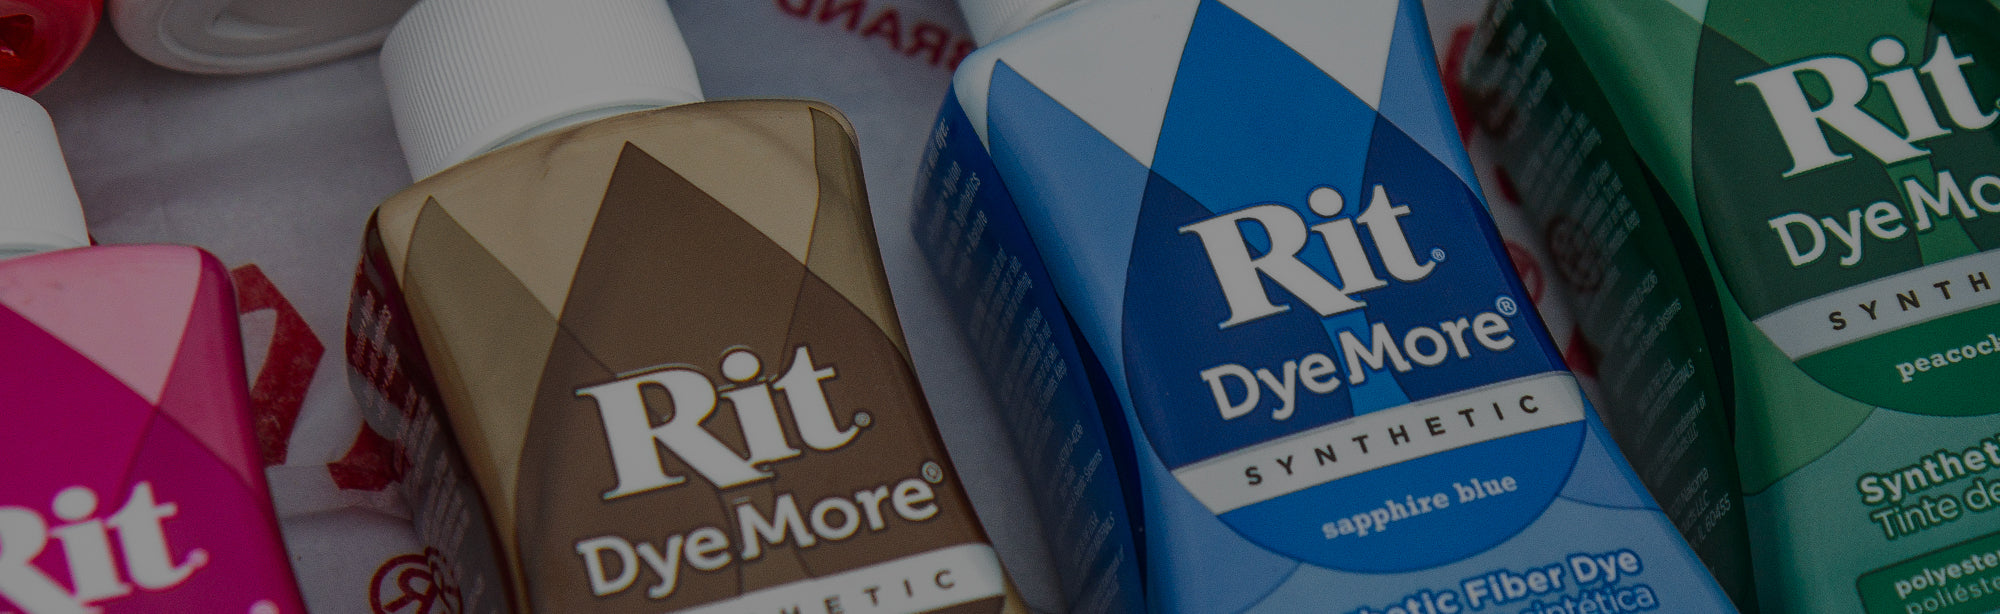 Rit® DyeMore™ Synthetic Fabric Dye